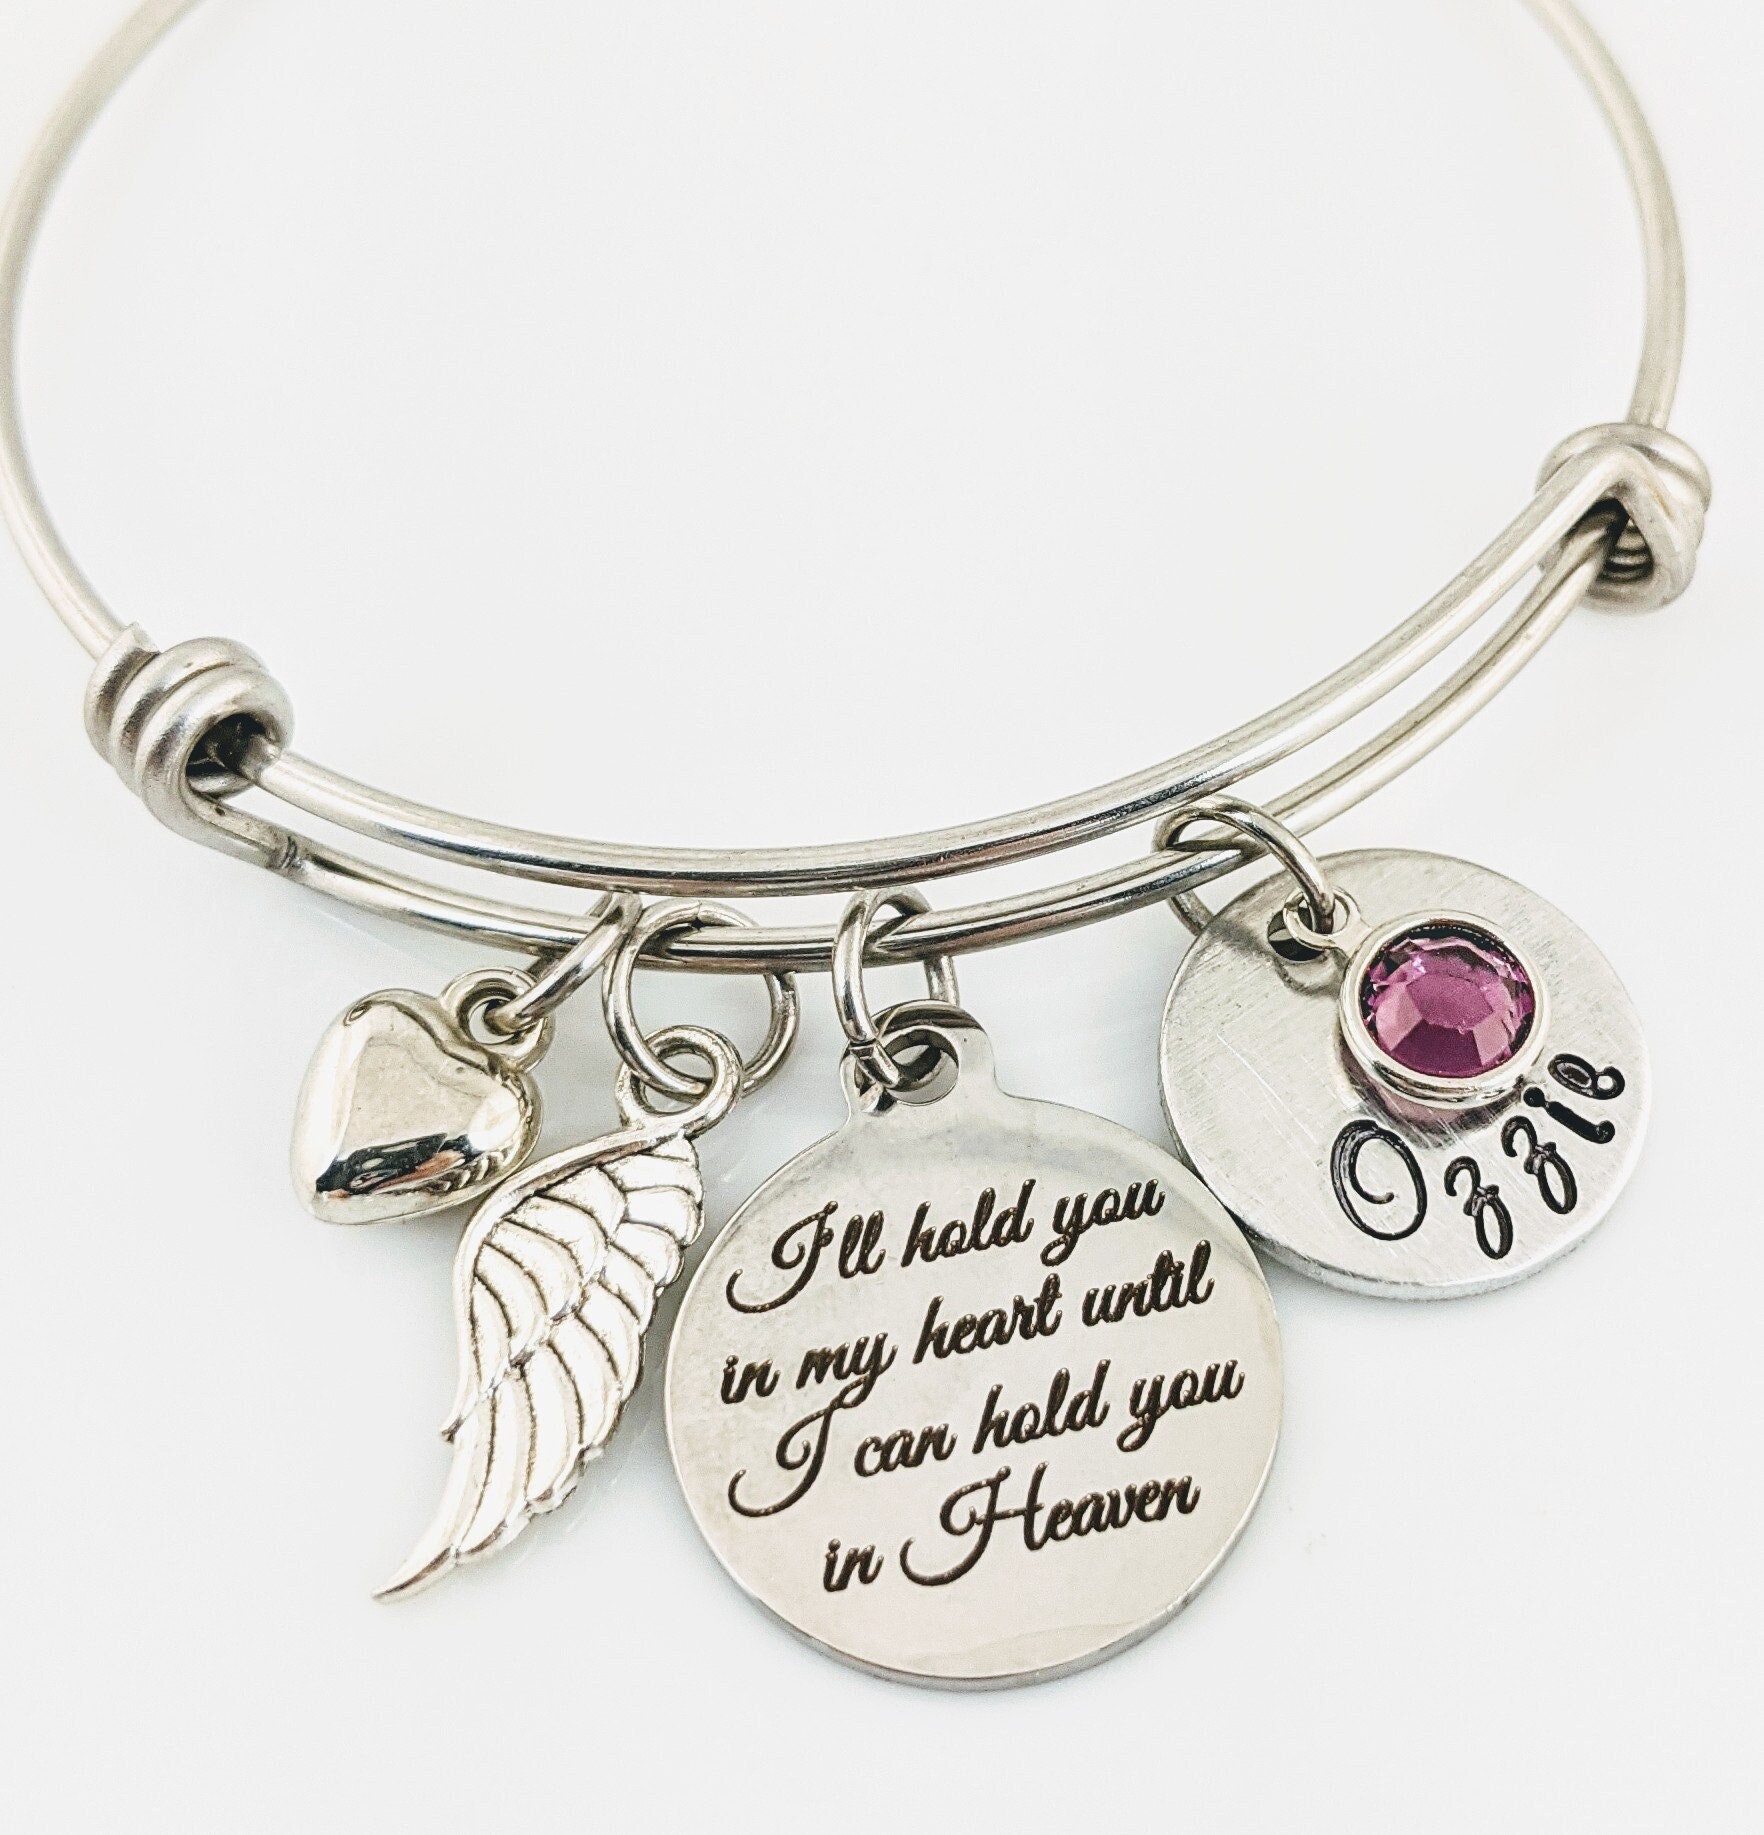 Jewellery Cremation & Memorial Jewellery Remembrance Bracelet Loss of Parent I'll hold you in my Heart Memorial Bracelet Memorial Miscarriage Bracelet Personalized Bracelet 